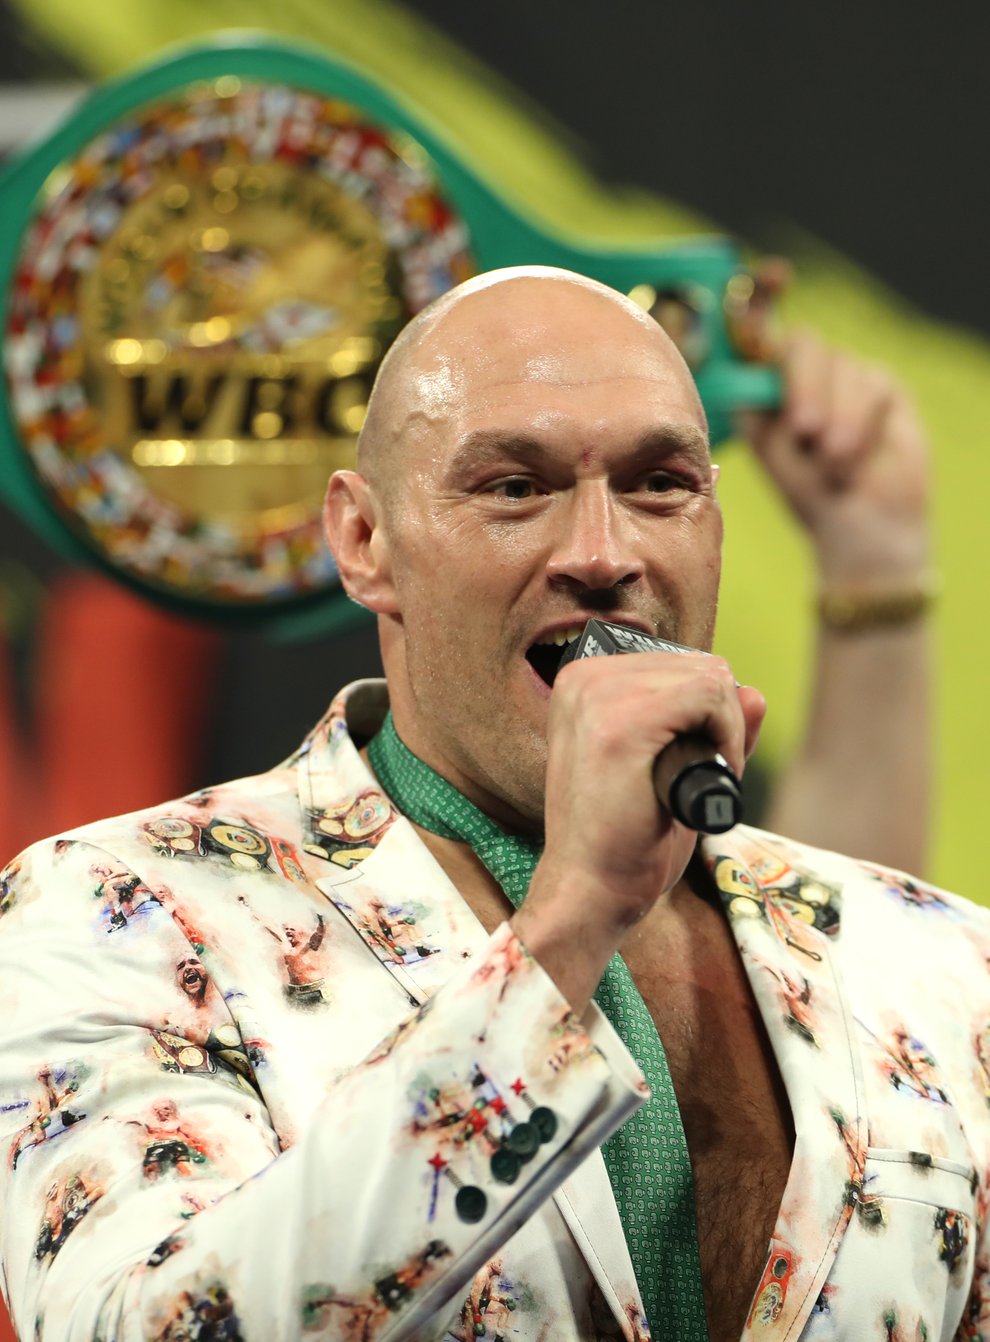 Fury returned to his home in Morecambe following his victory over Deontay Wilder (PA Images)